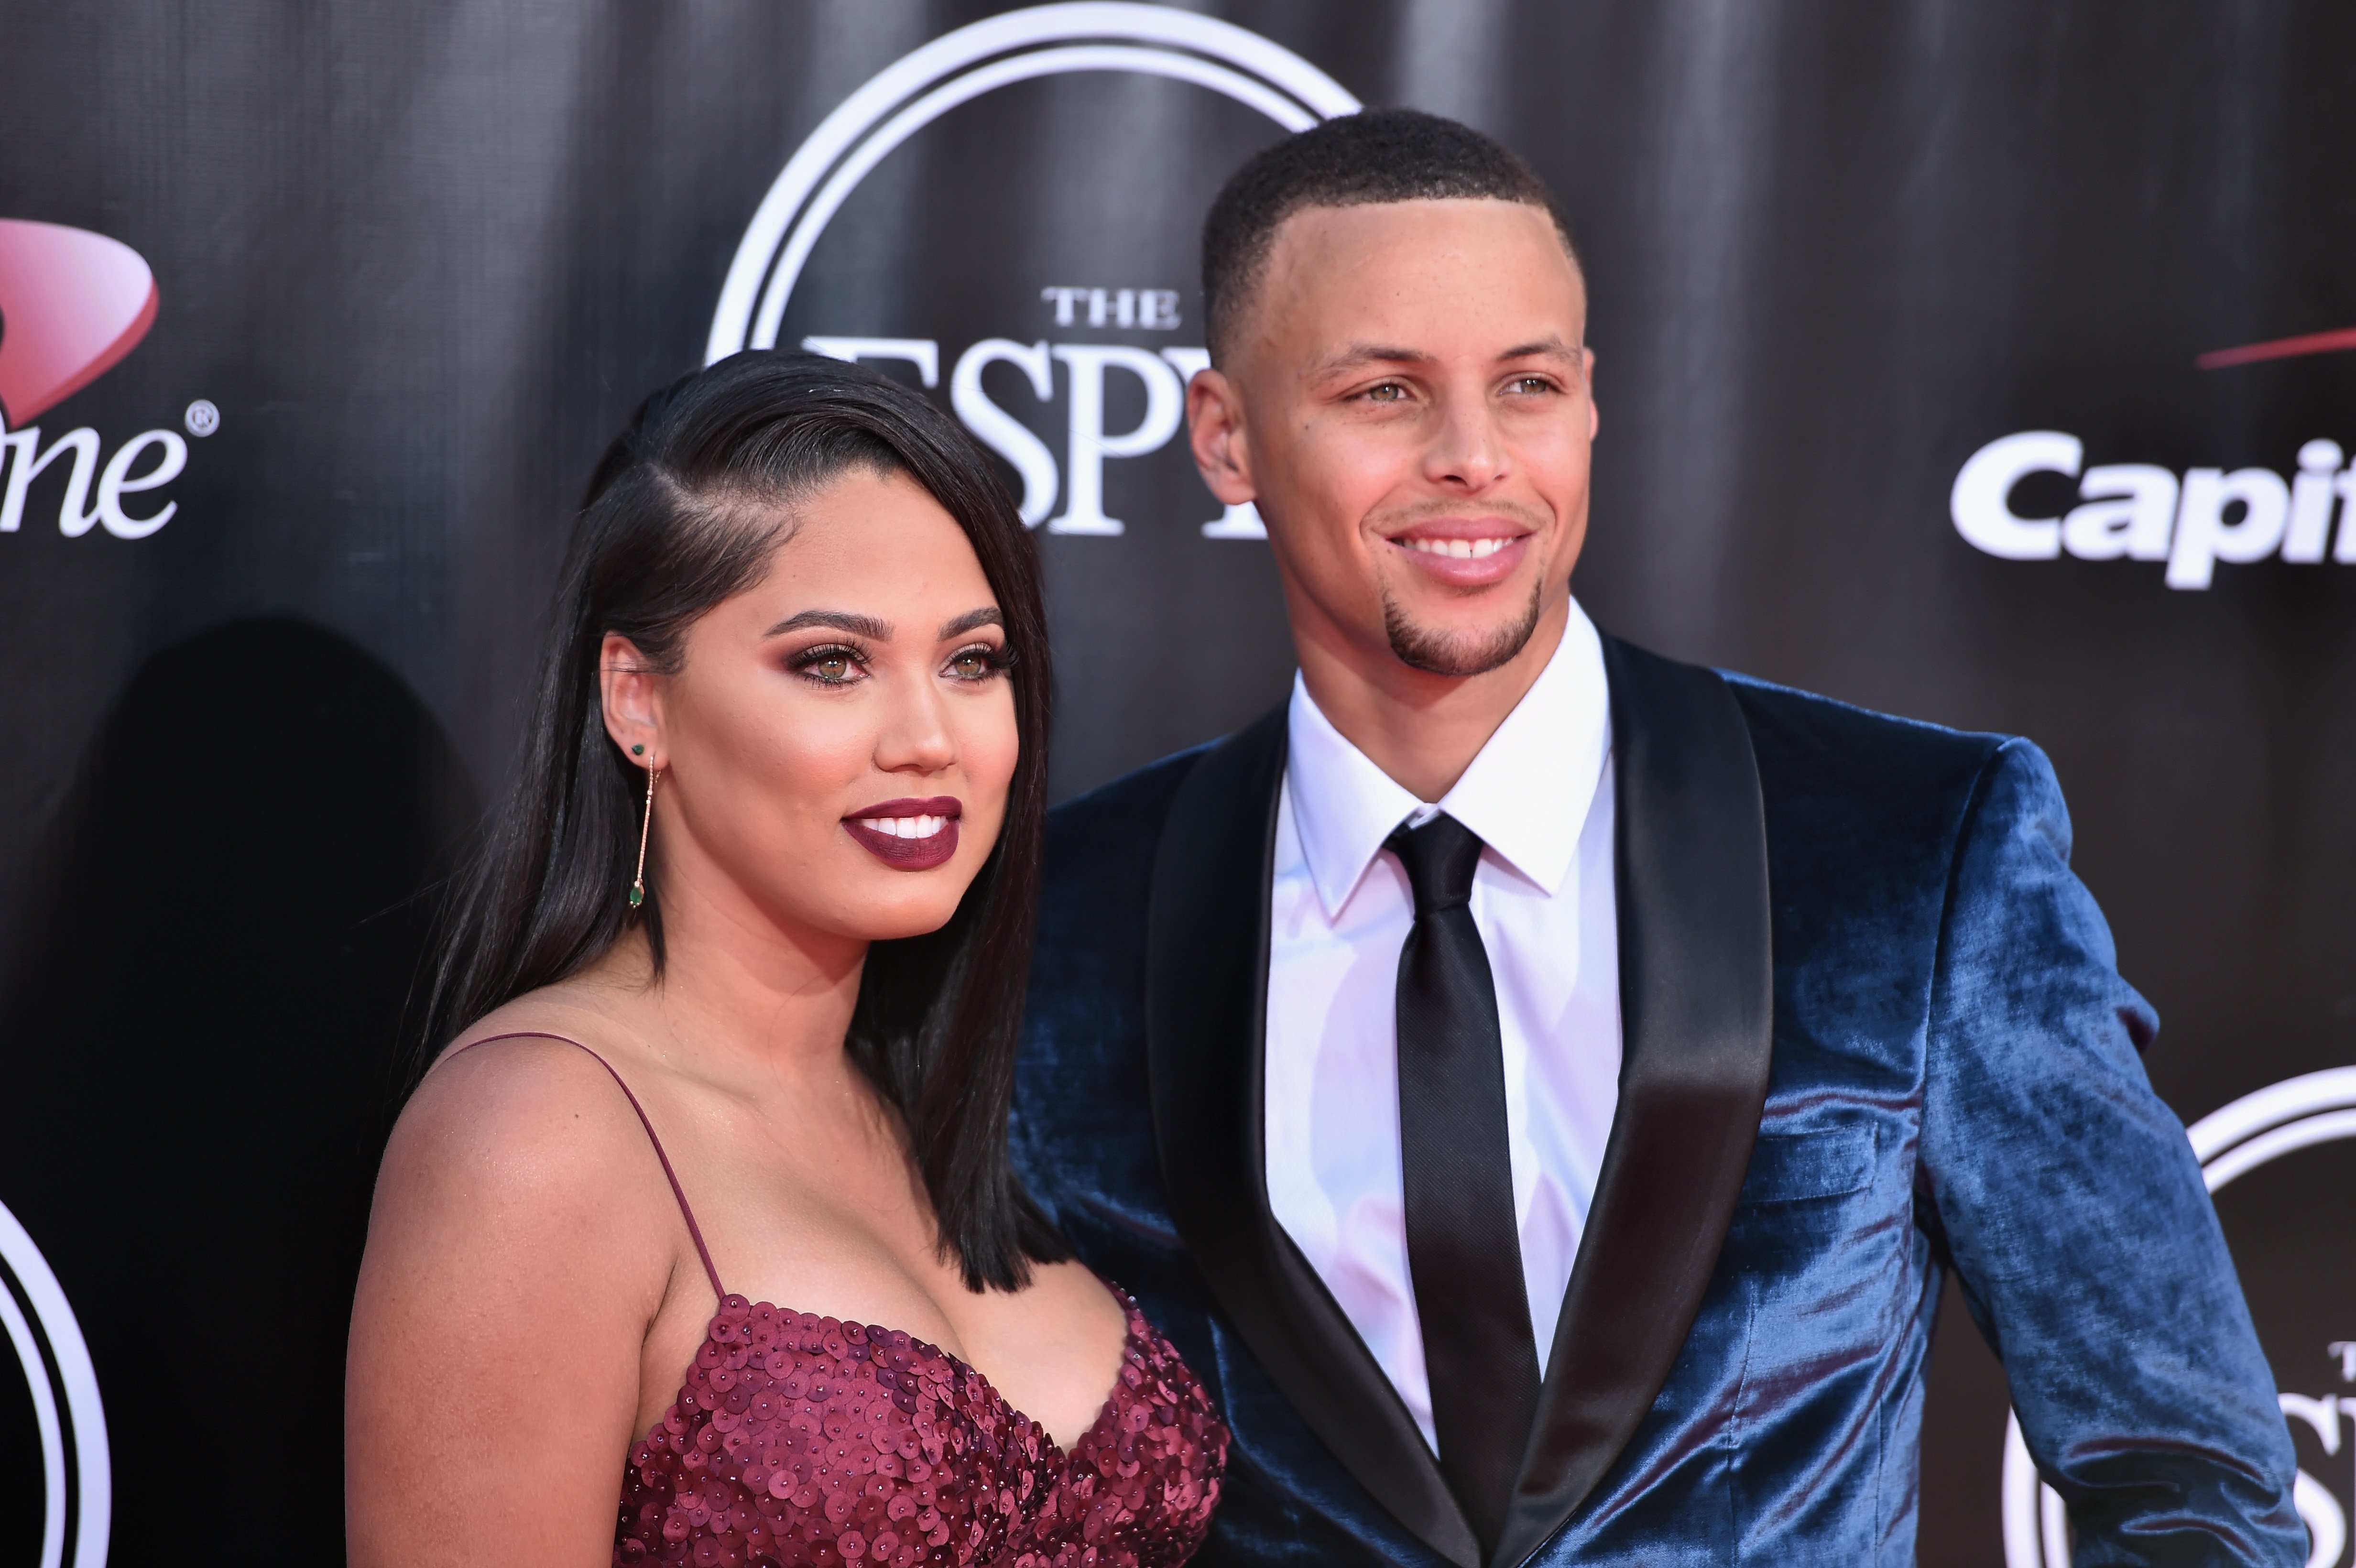 Stephen Curry and Ayesha Curry at the 2016 ESPYS at Microsoft Theater on July 13, 2016 in Los Angeles, California.| Source: Getty Images